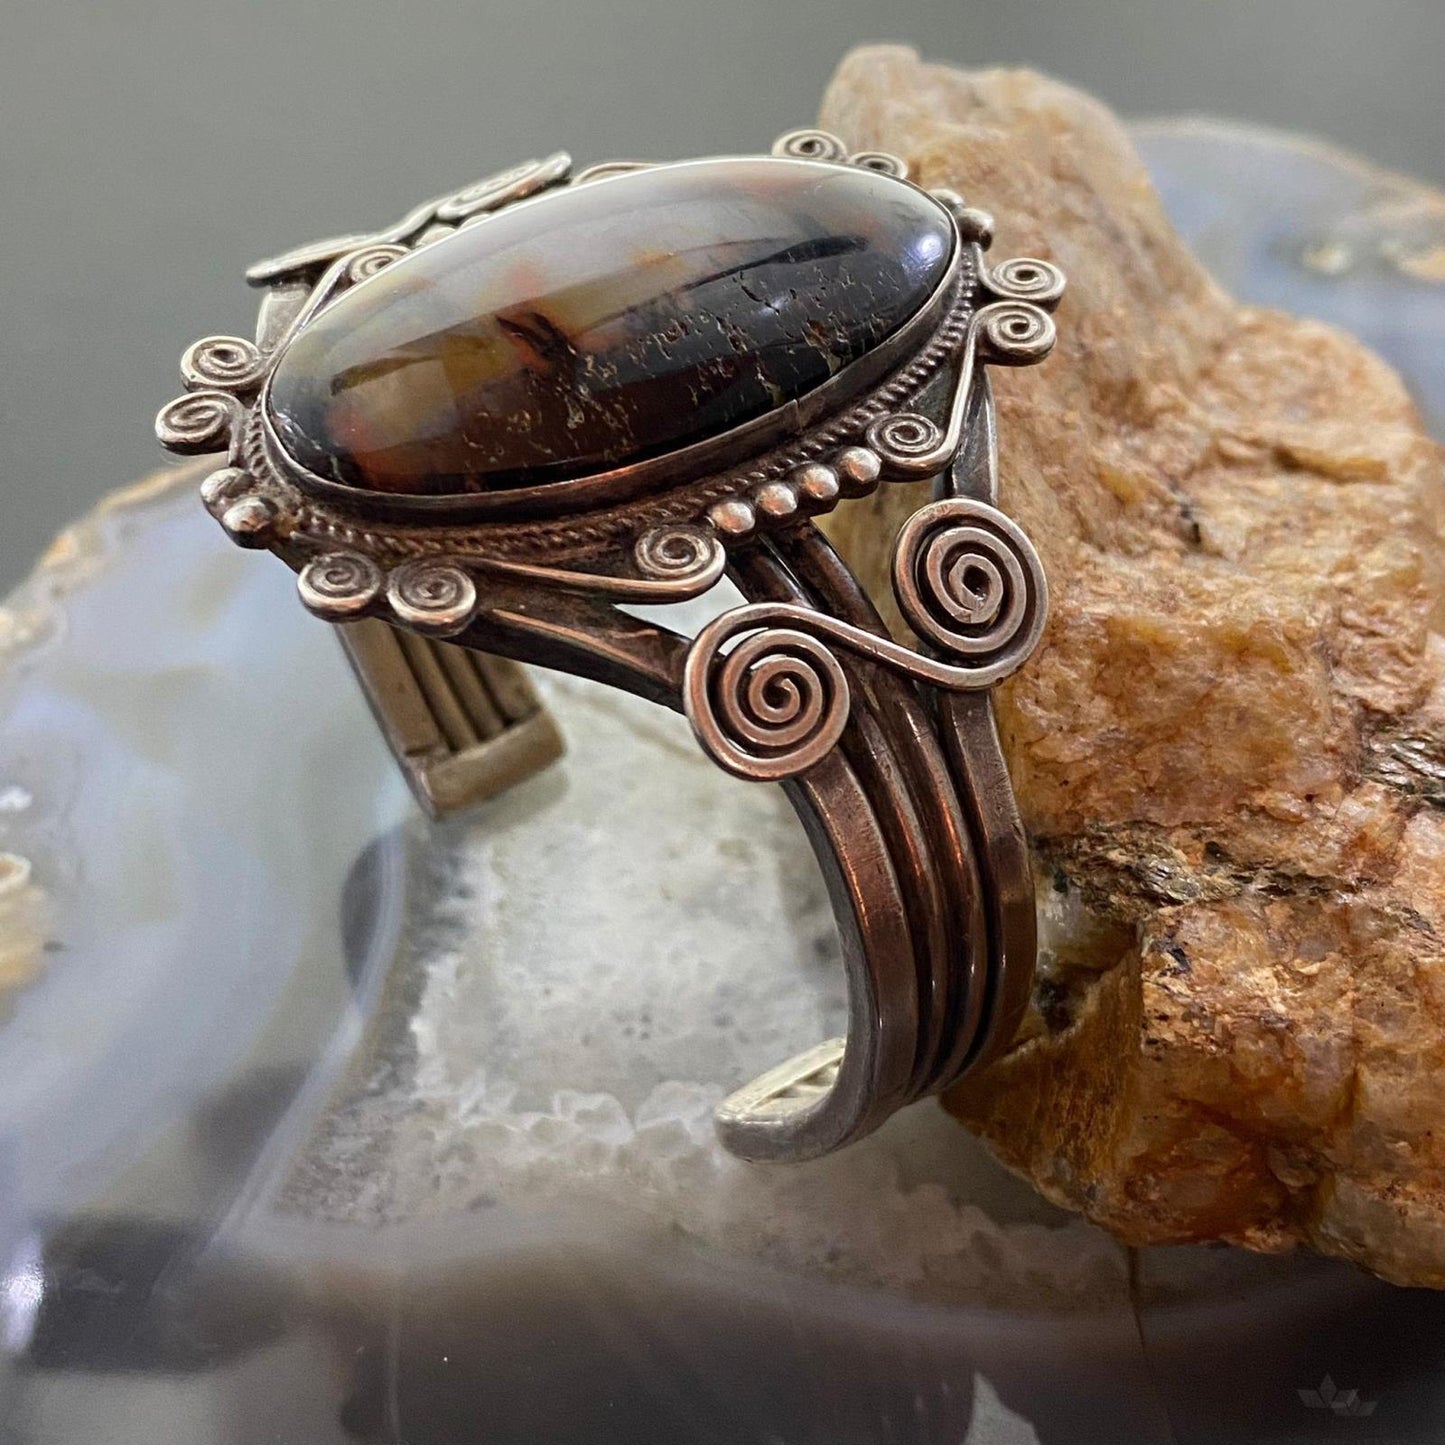 Native American Silver Oval Agate Decorated Heavy Gauge Cuff Bracelet For Women